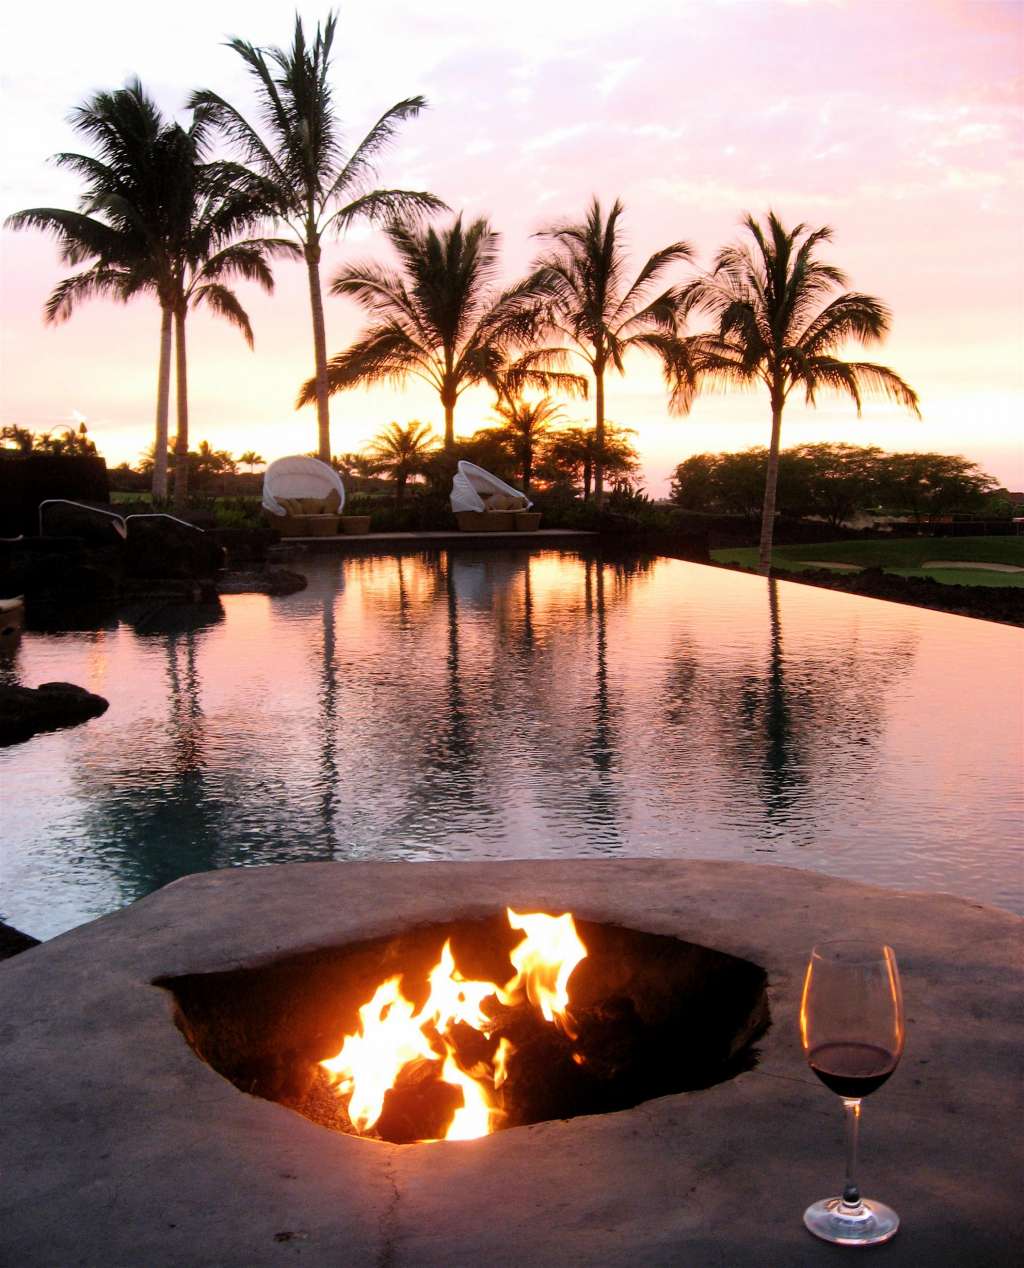 "Four Seasons Resort Hualalai." pool is made of rock and features an aquarium. It holds 1.8 million gallons of water.